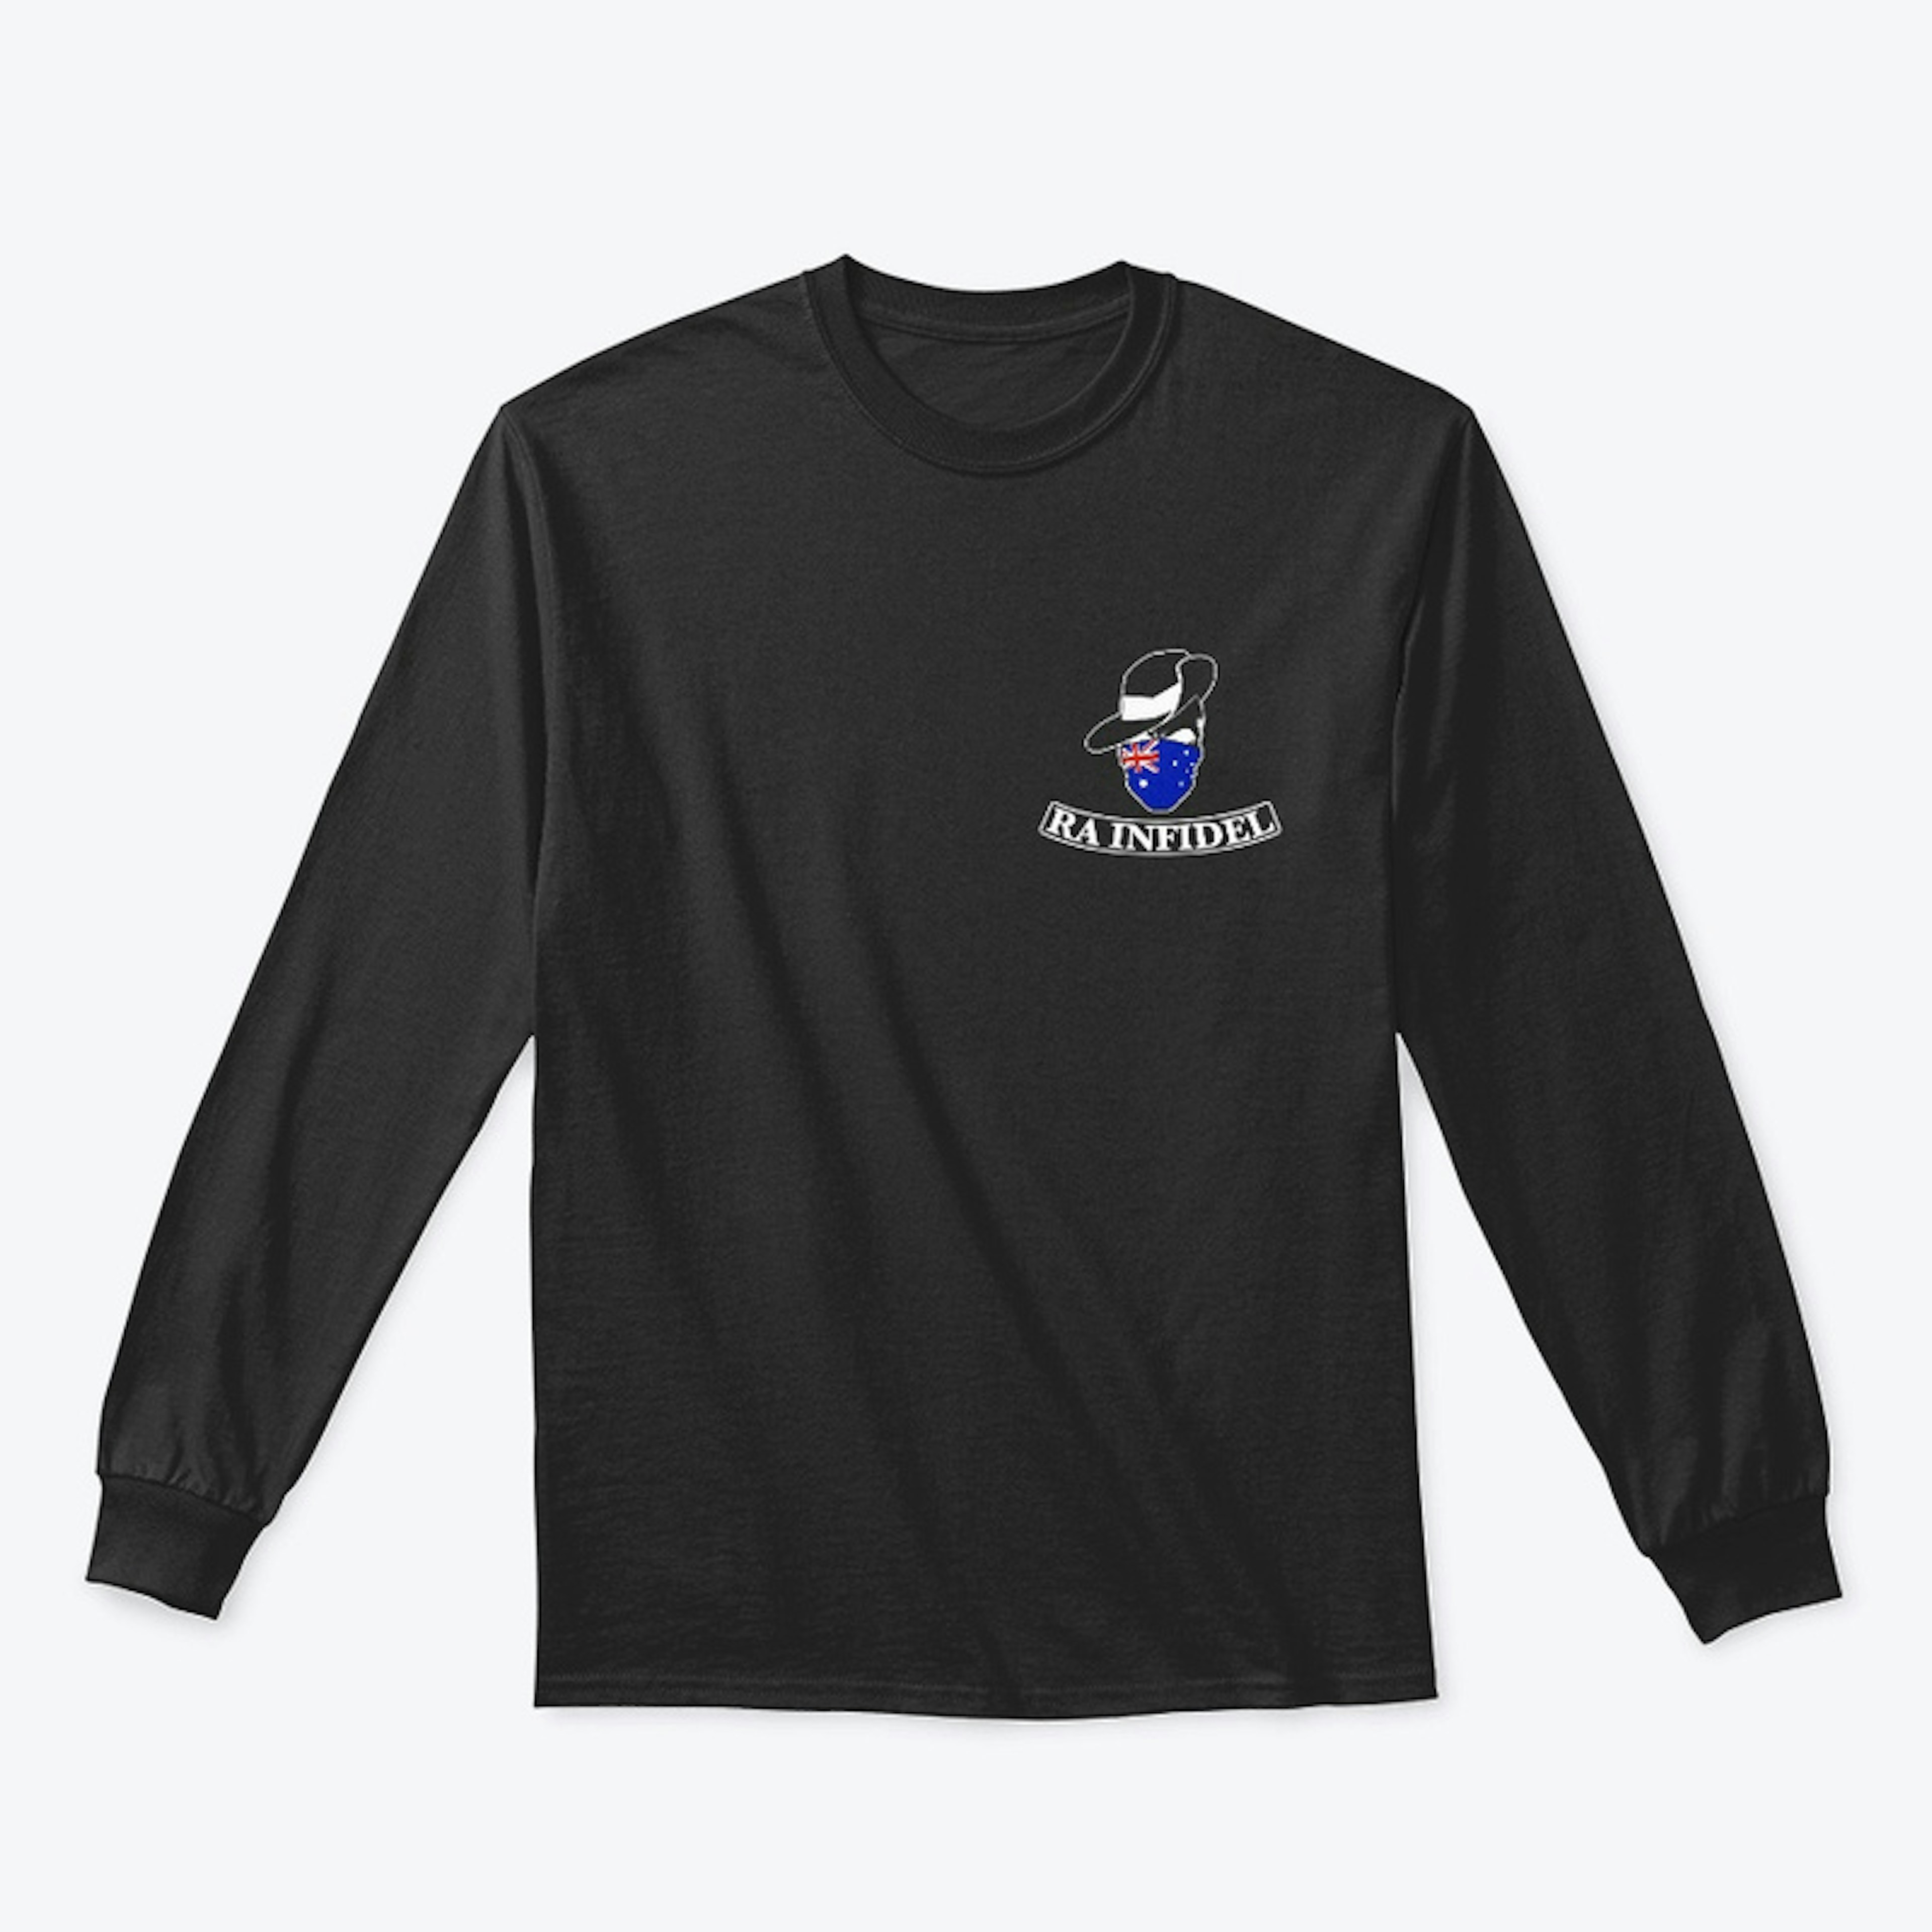 Special Edition Long Sleeve Shirts!22